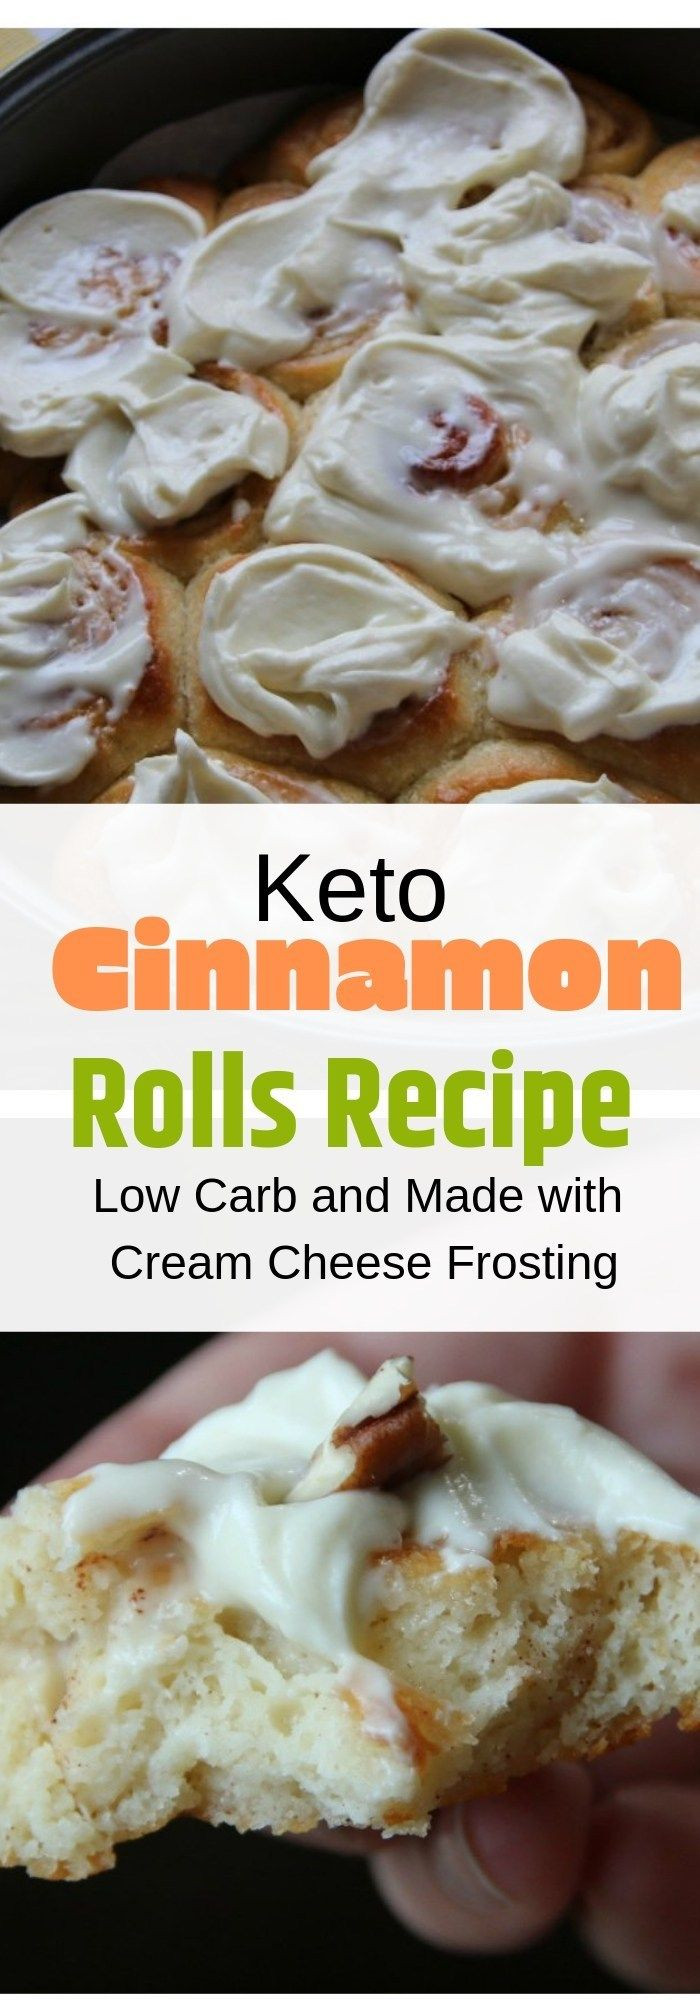 Keto Bread Rolls No Cheese
 Keto Cinnamon Rolls Recipe – Low Carb and Made with Cream